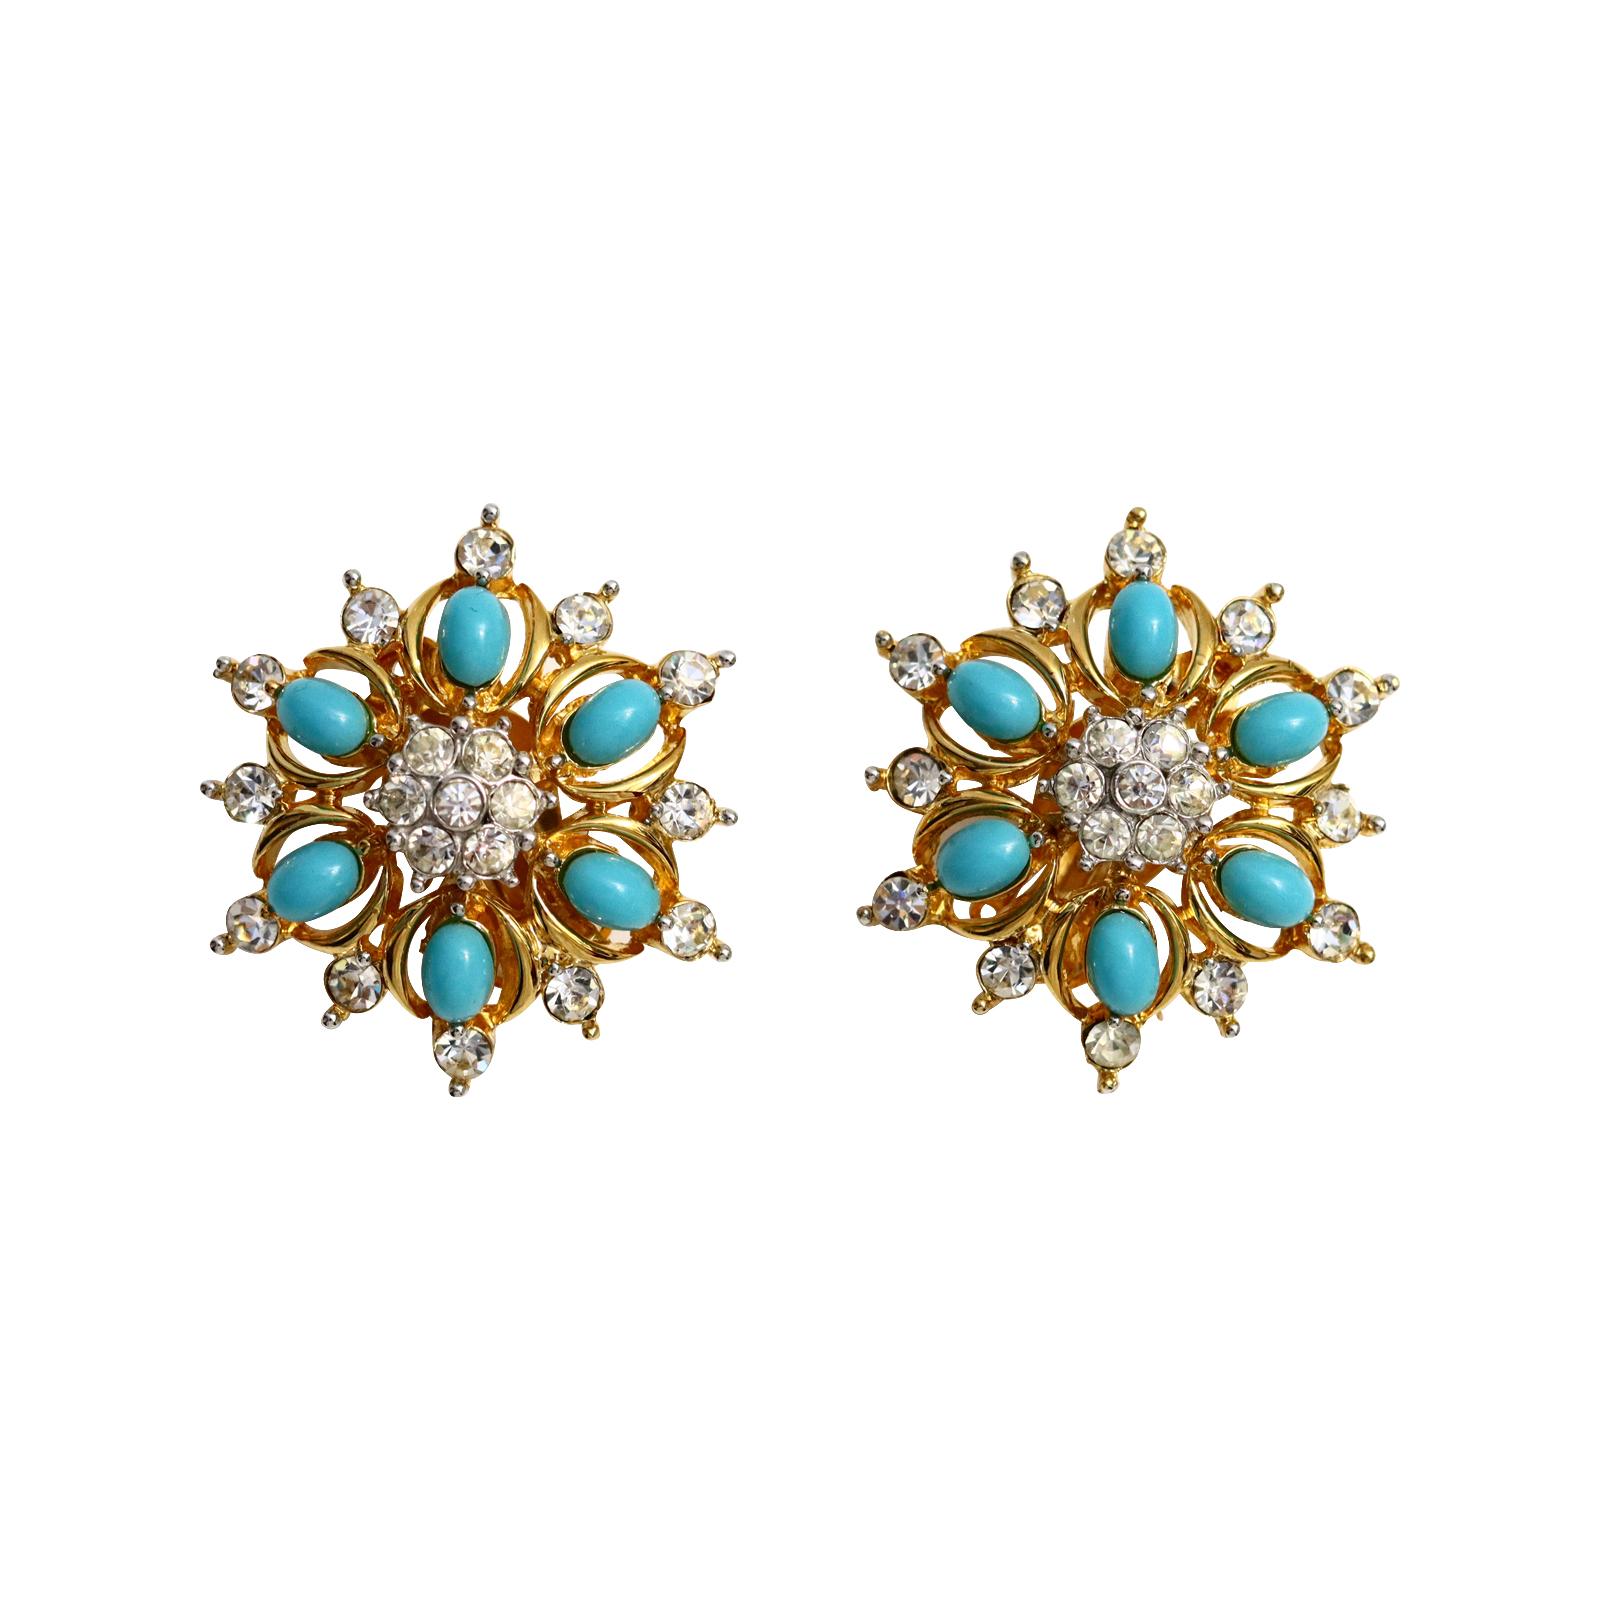 Vintage Jomaz Gold Diamante and Faux Turquoise Earrings Circa 1960s. These are so chic and look like fine. There is a Jomaz brooch on site that would look divine with these.  There is a lot of thought that went into the construction of making these.